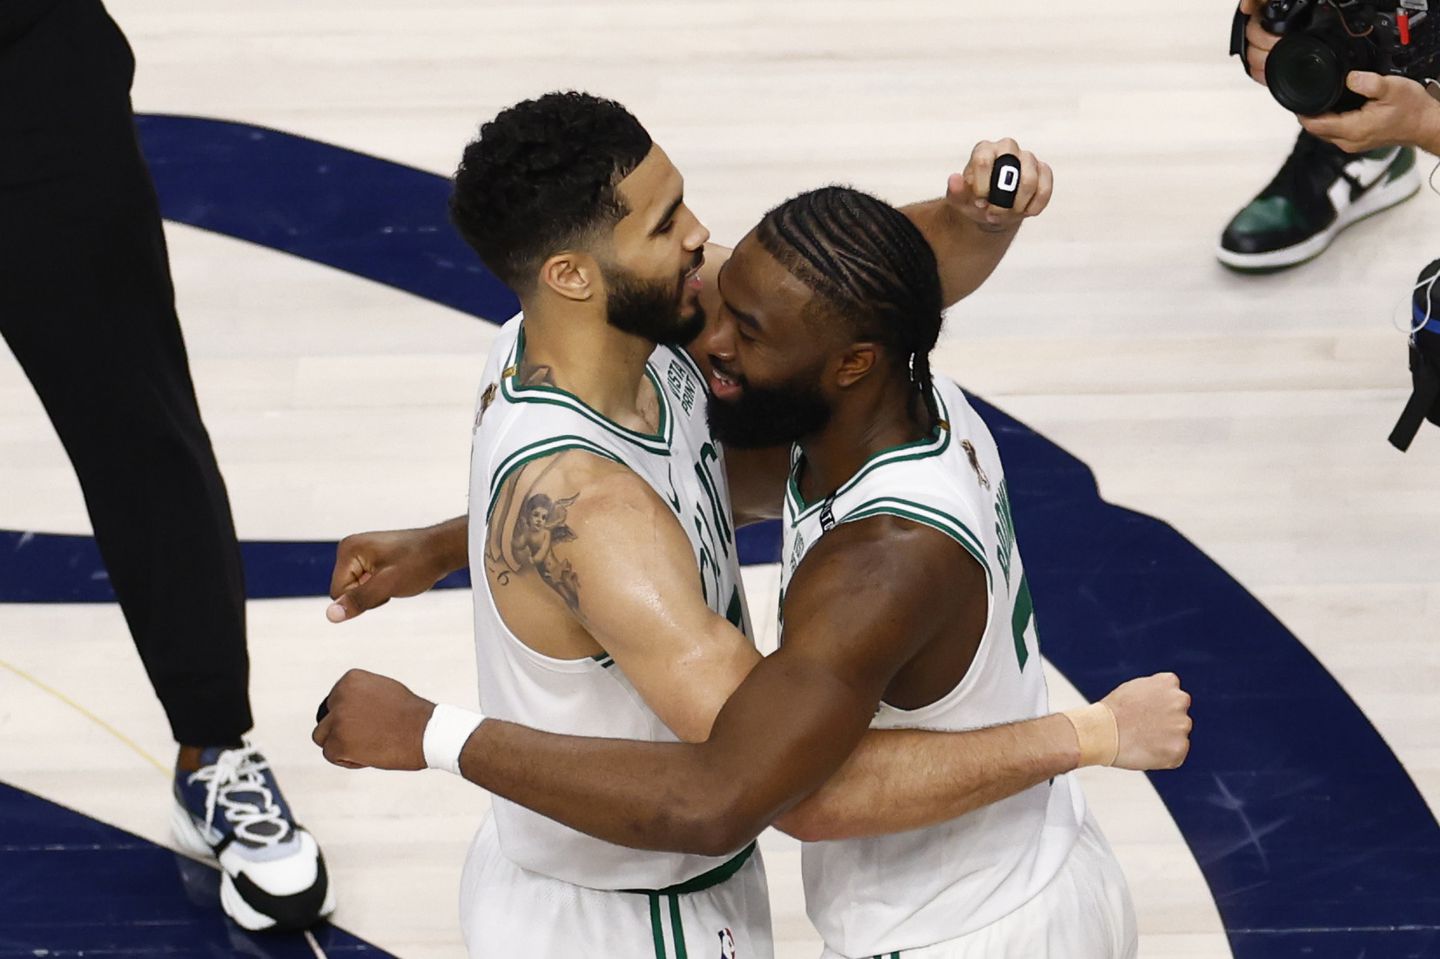 When the Mavericks erased a 21-point deficit and pulled within 3 points, the Celtics embraced the combined efforts of Jayson Tatum (left) and Jaylen Brown (right) to help pull them through to a Game 3 win in Dallas.